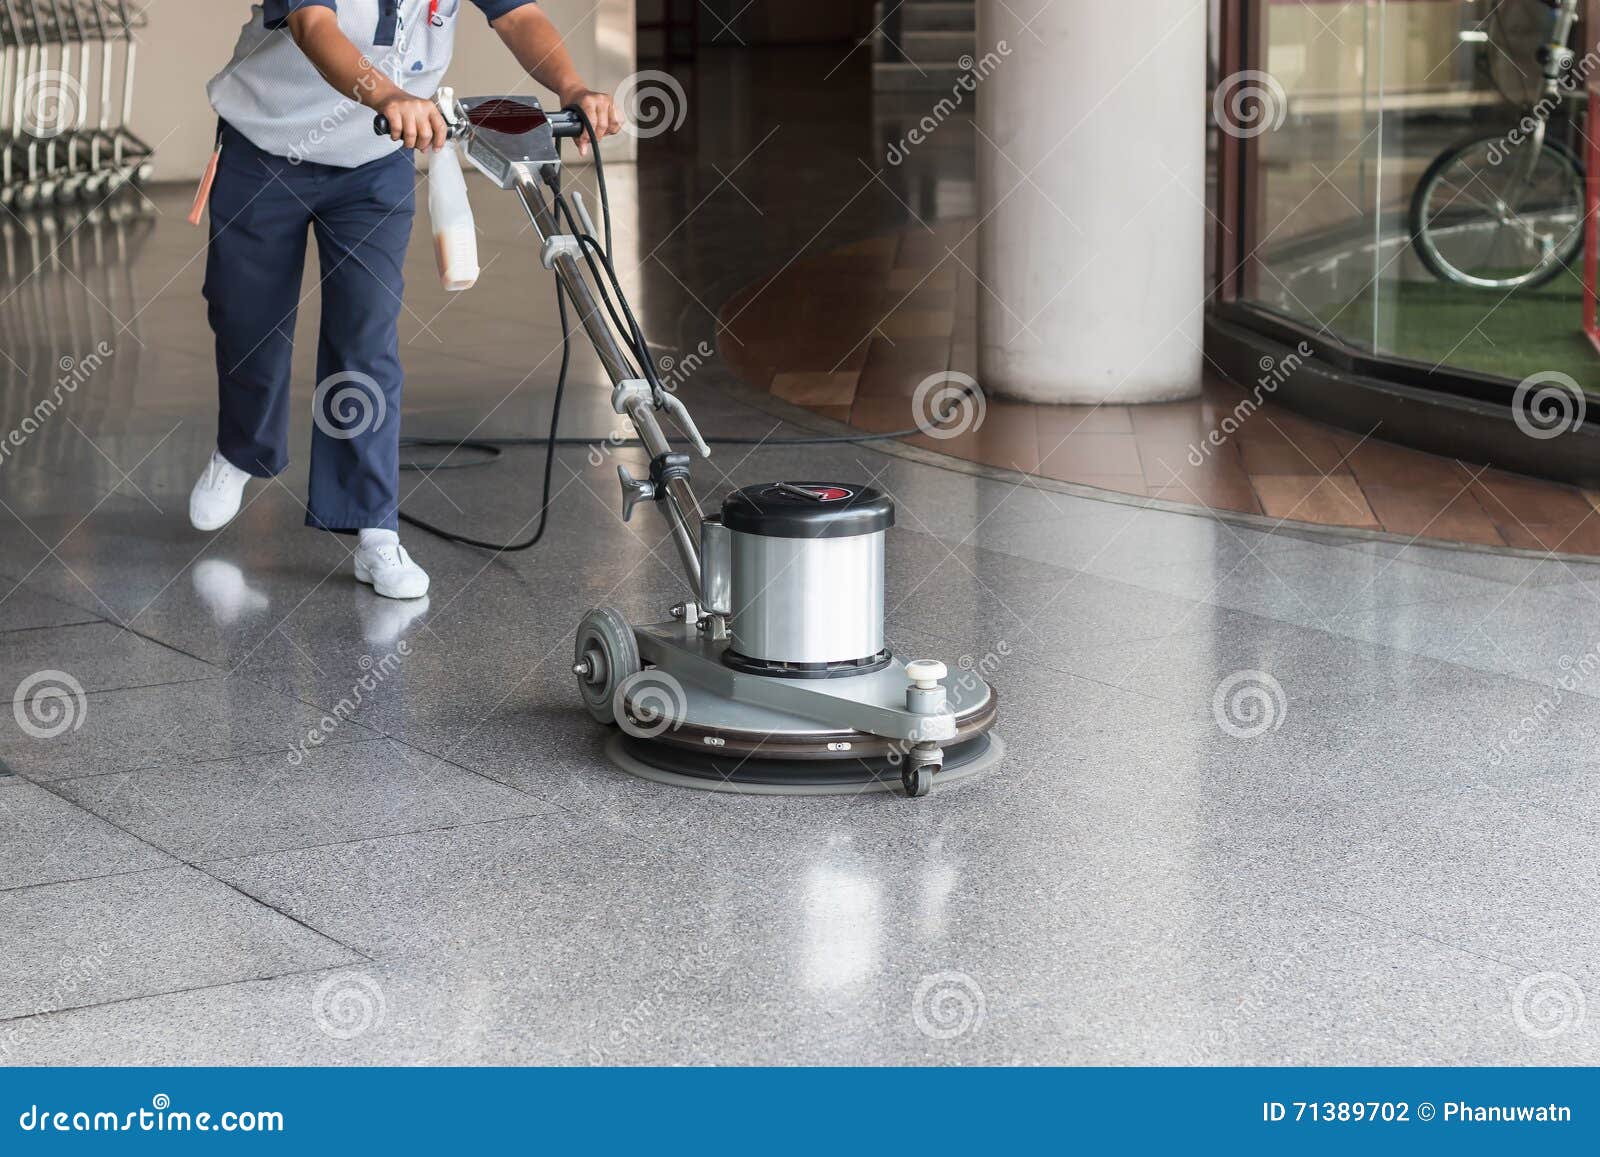 woman cleaning the floor with polishing machine